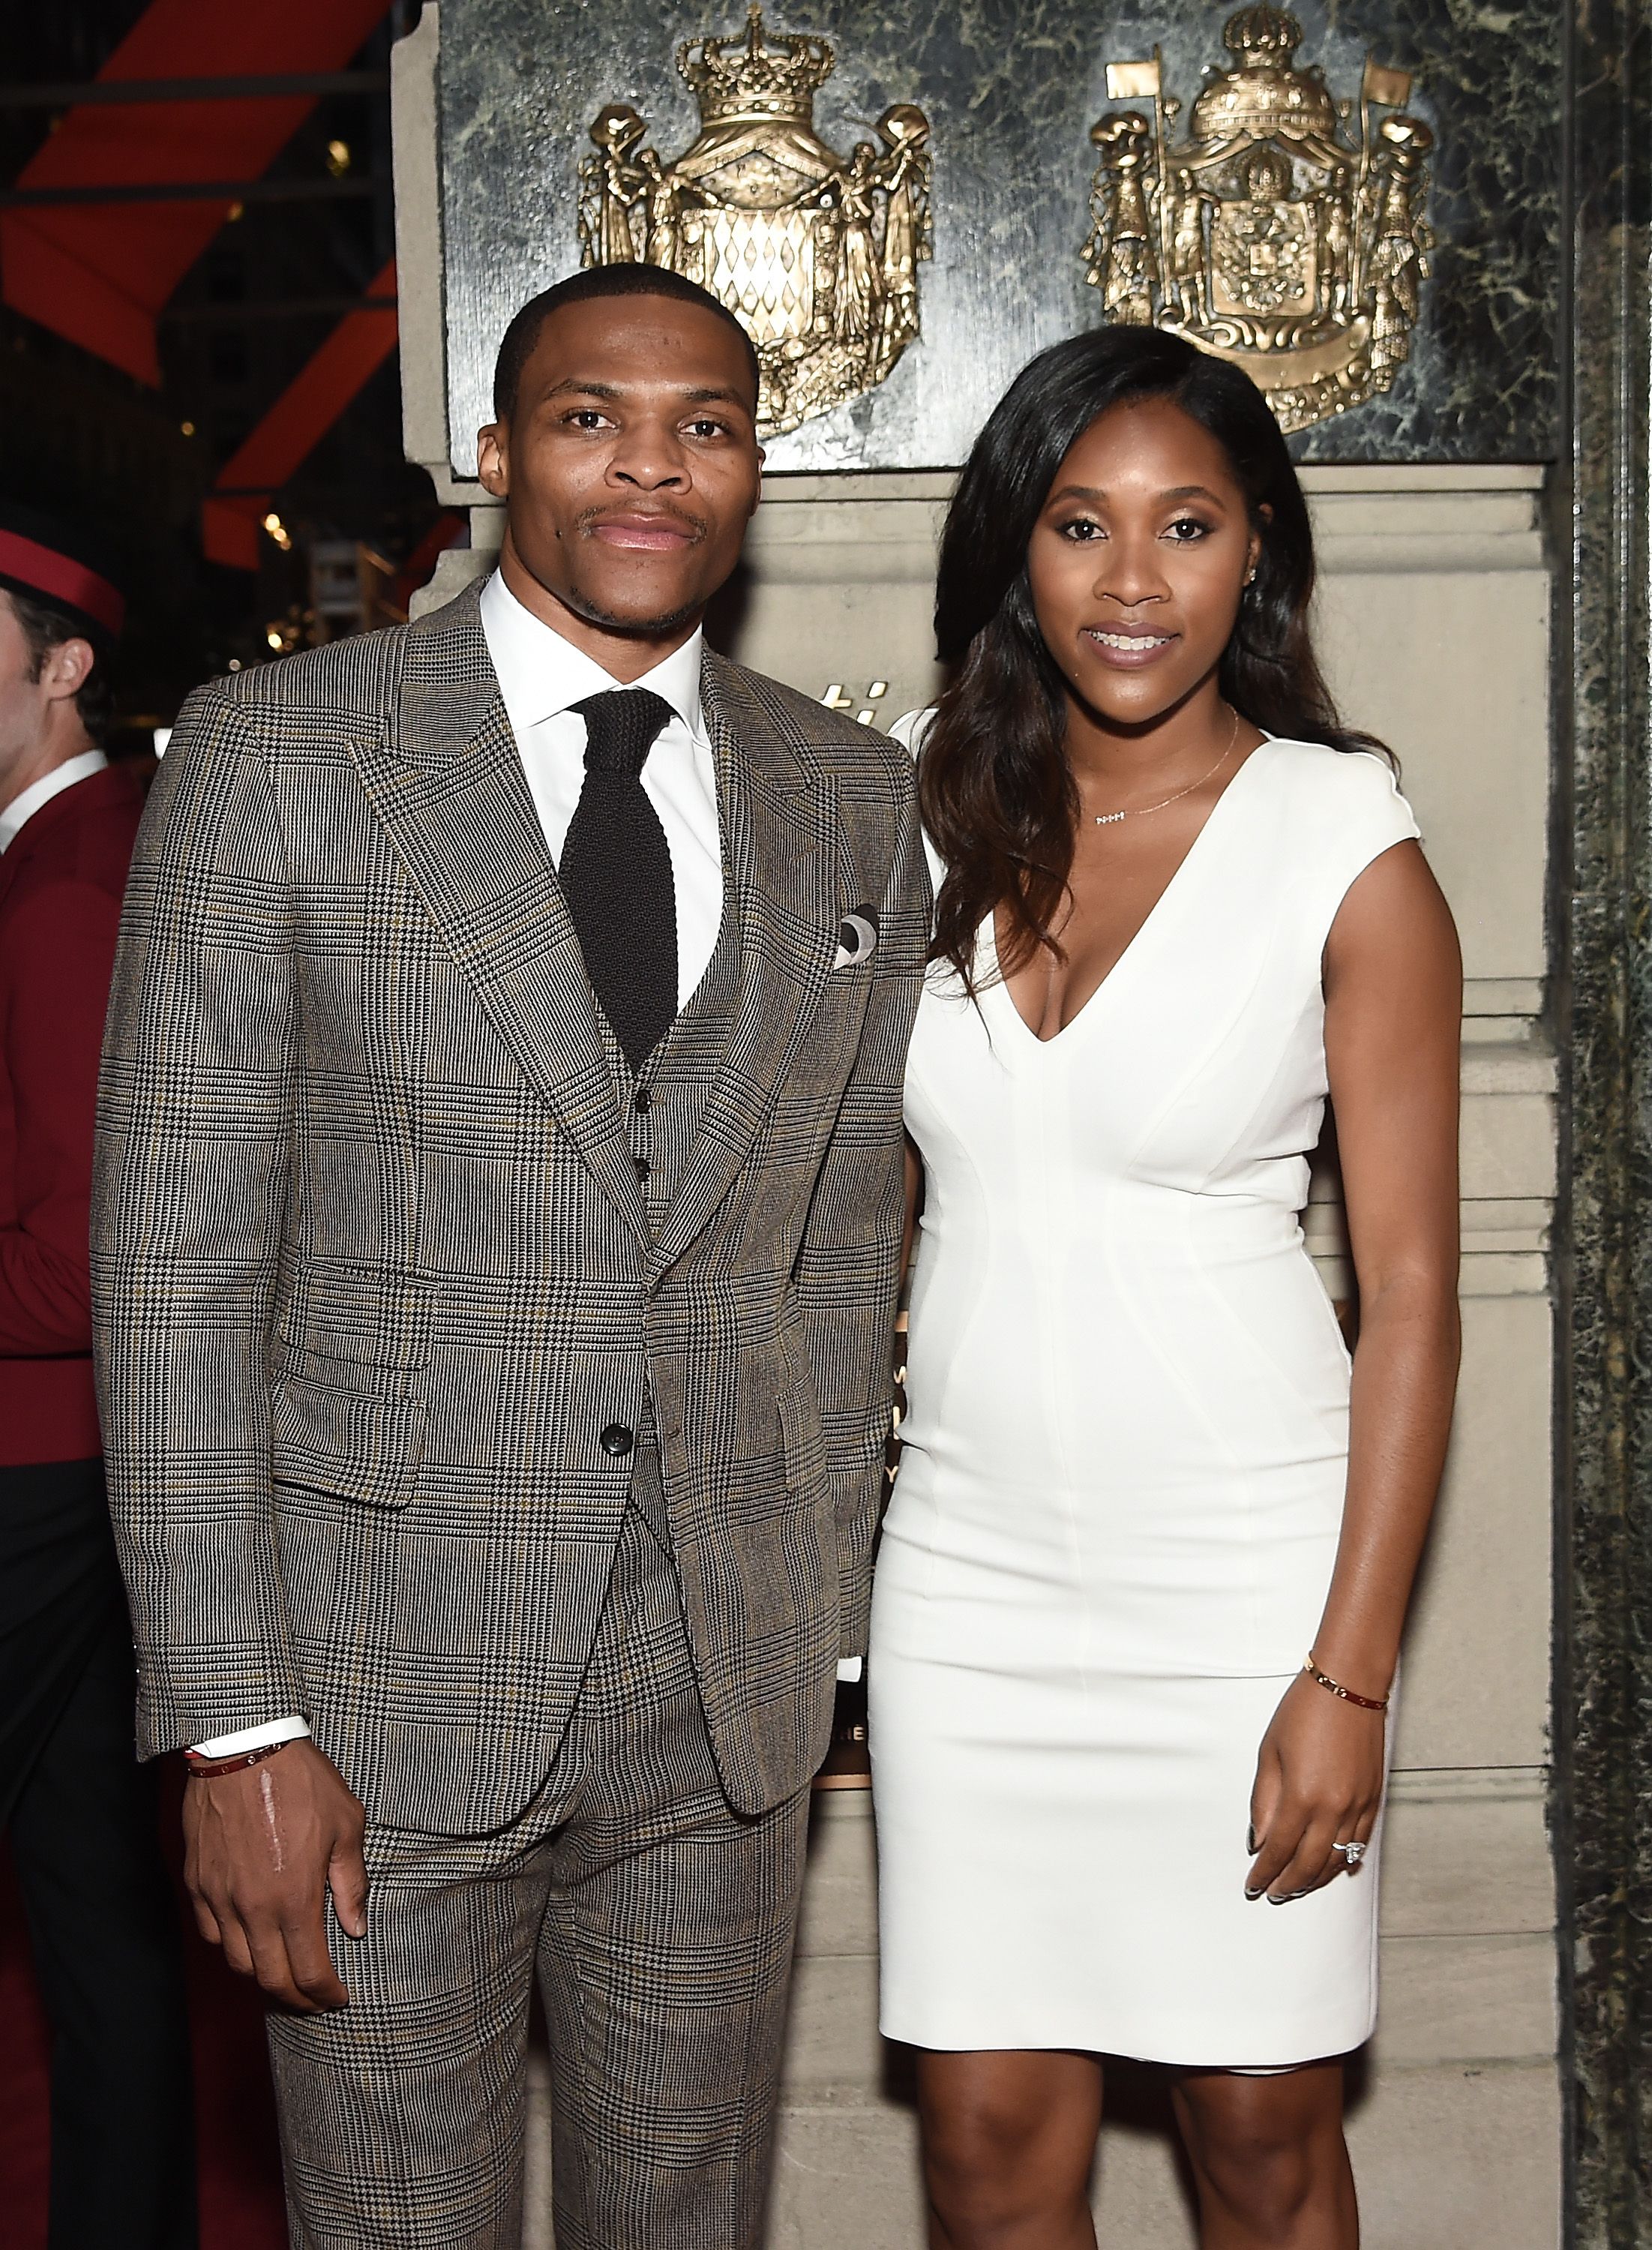 Russell Westbrook and wife Nina Westbrook attend The Cartier Fifth Avenue Grand Reopening Event at the Cartier Mansion on September 7, 2016 in New York City. | Source: Getty Images